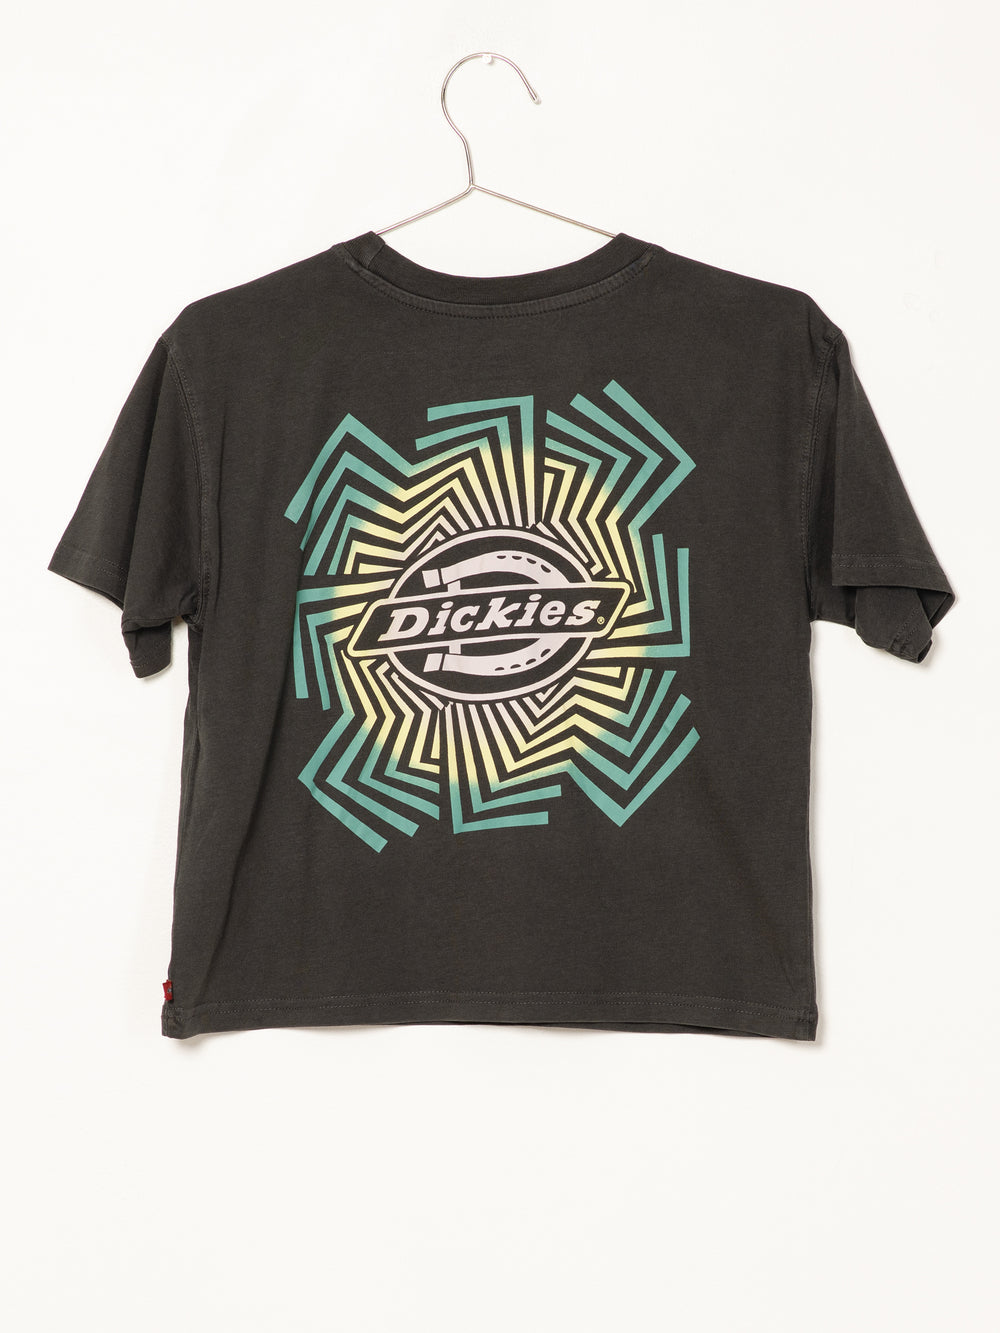 DICKIES CROOKED SWIRL T-SHIRT  - CLEARANCE